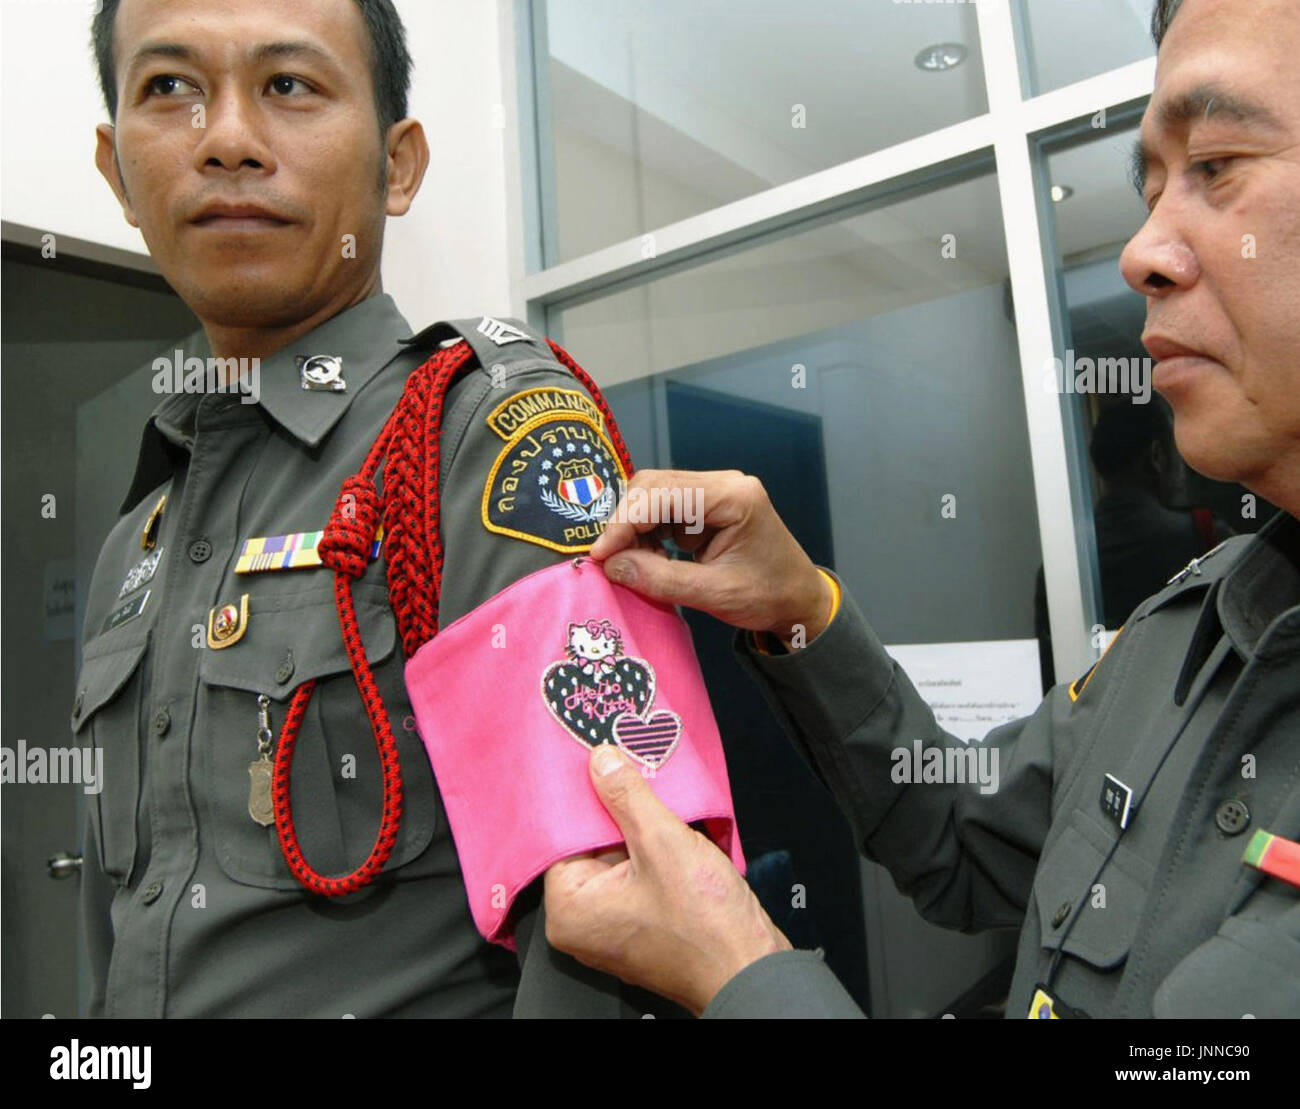 Verrast zijn welzijn hypotheek BANGKOK, Thailand - A police officer pins a pink "Hello Kitty" armband on  another officer's arm on Aug. 7 in Bangkok. Royal Thai Police announce a  new policy in which officers who